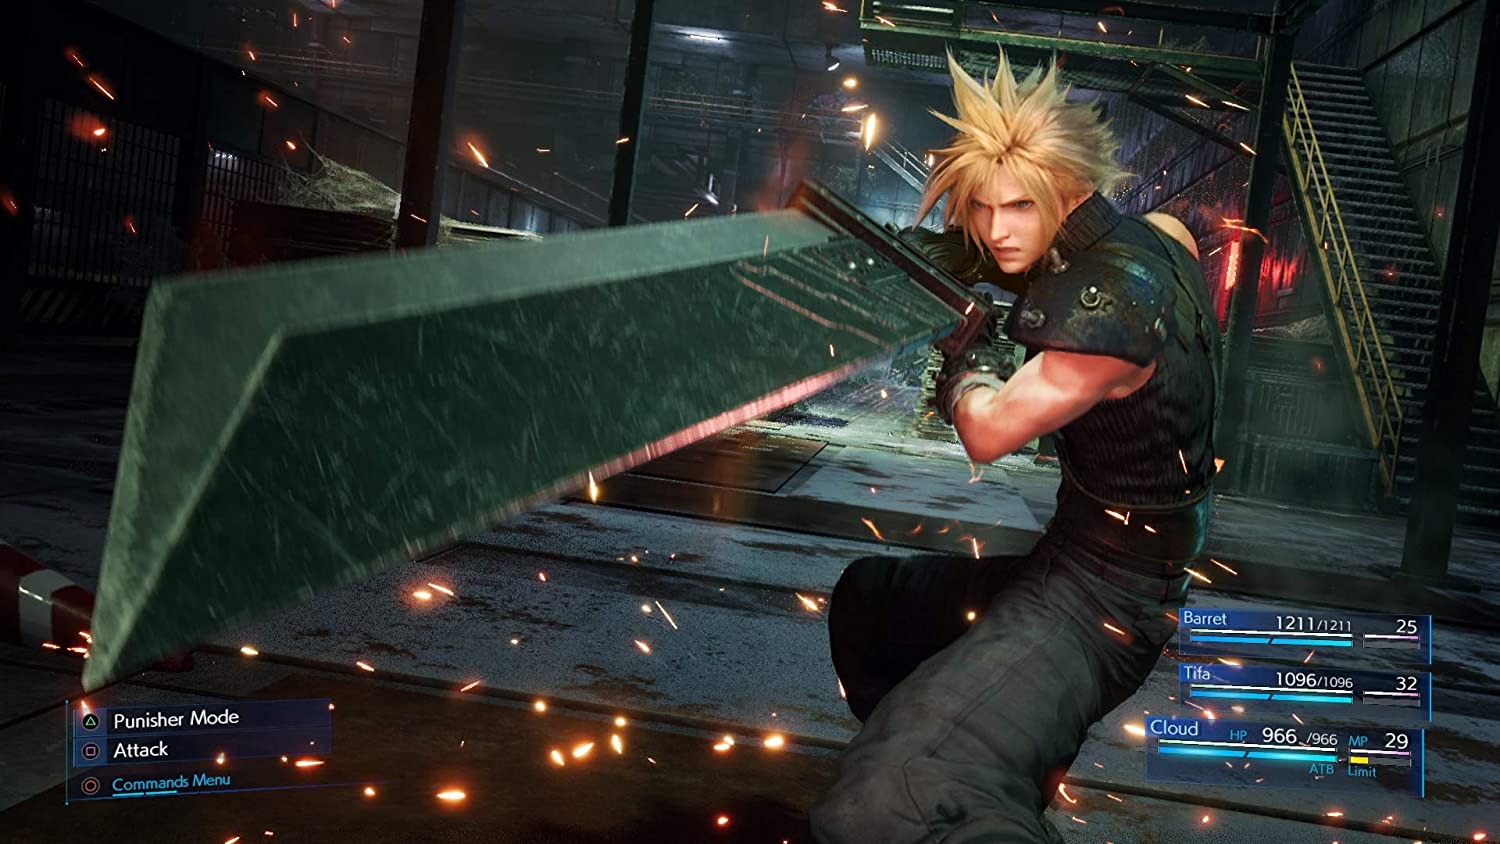 The Final Fantasy VII Remake Soundtrack Has 7 CDs and Costs $77.77